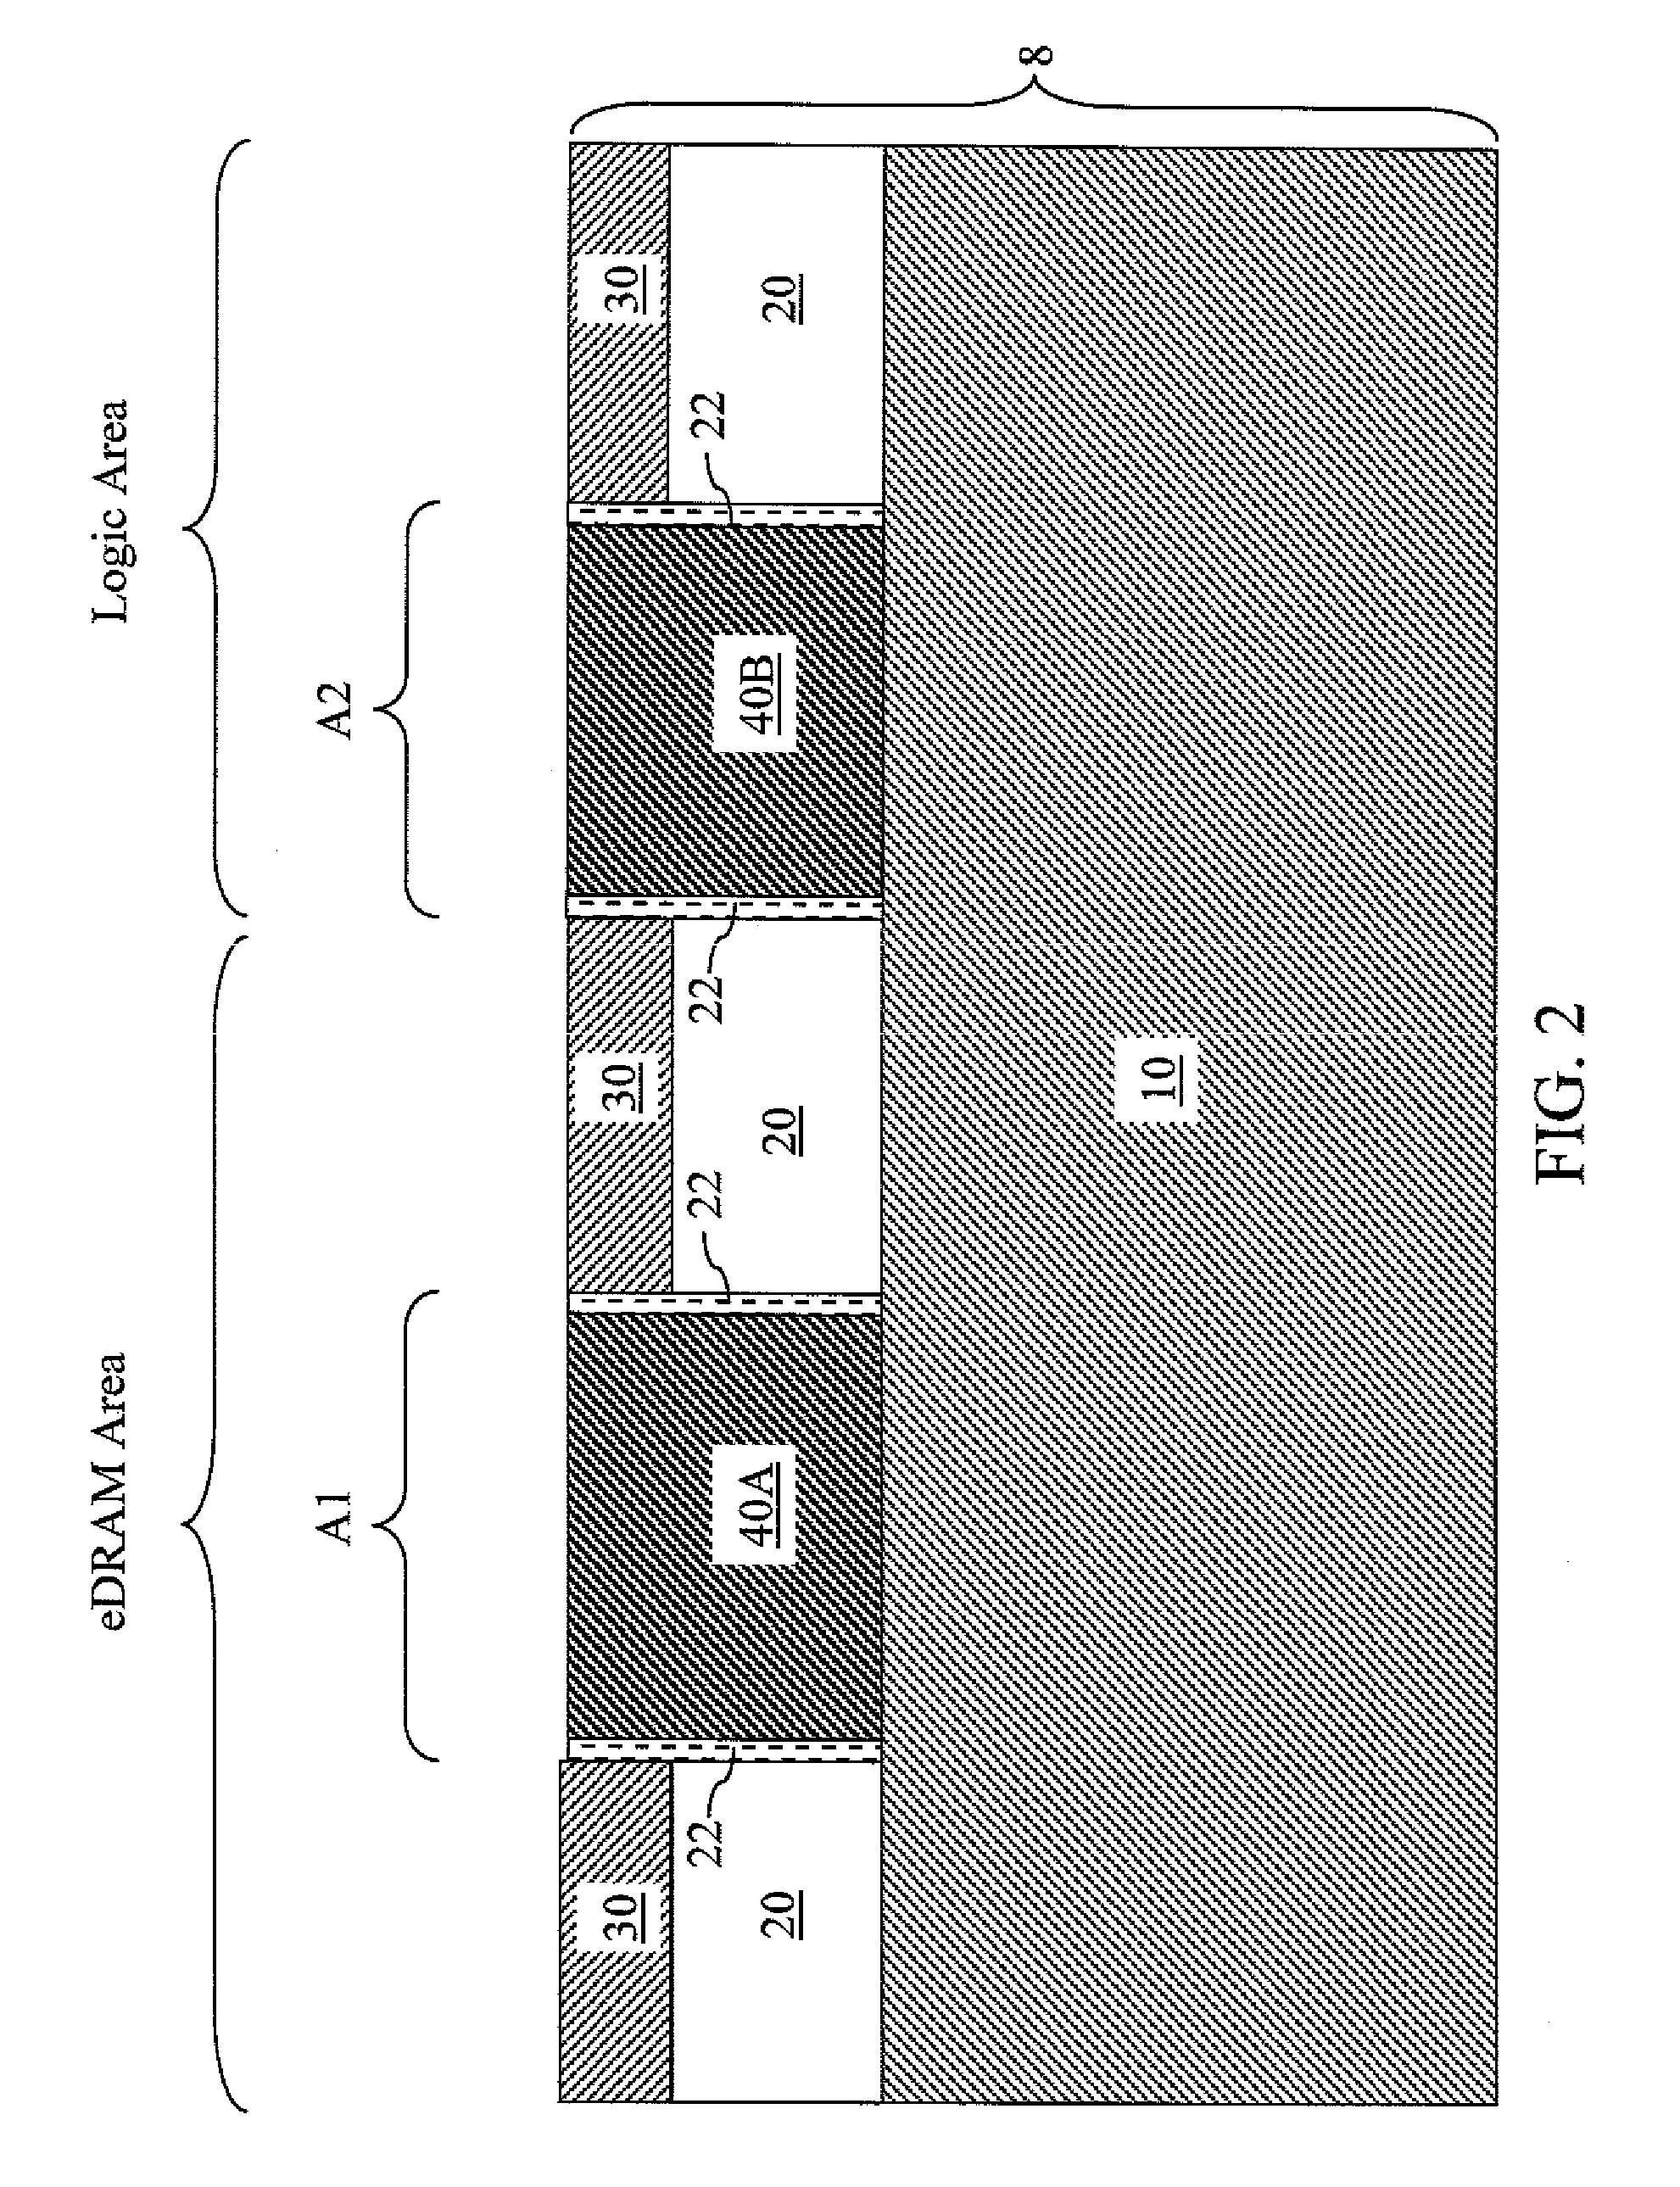 Hybrid orientation substrate compatible deep trench capacitor embedded dram